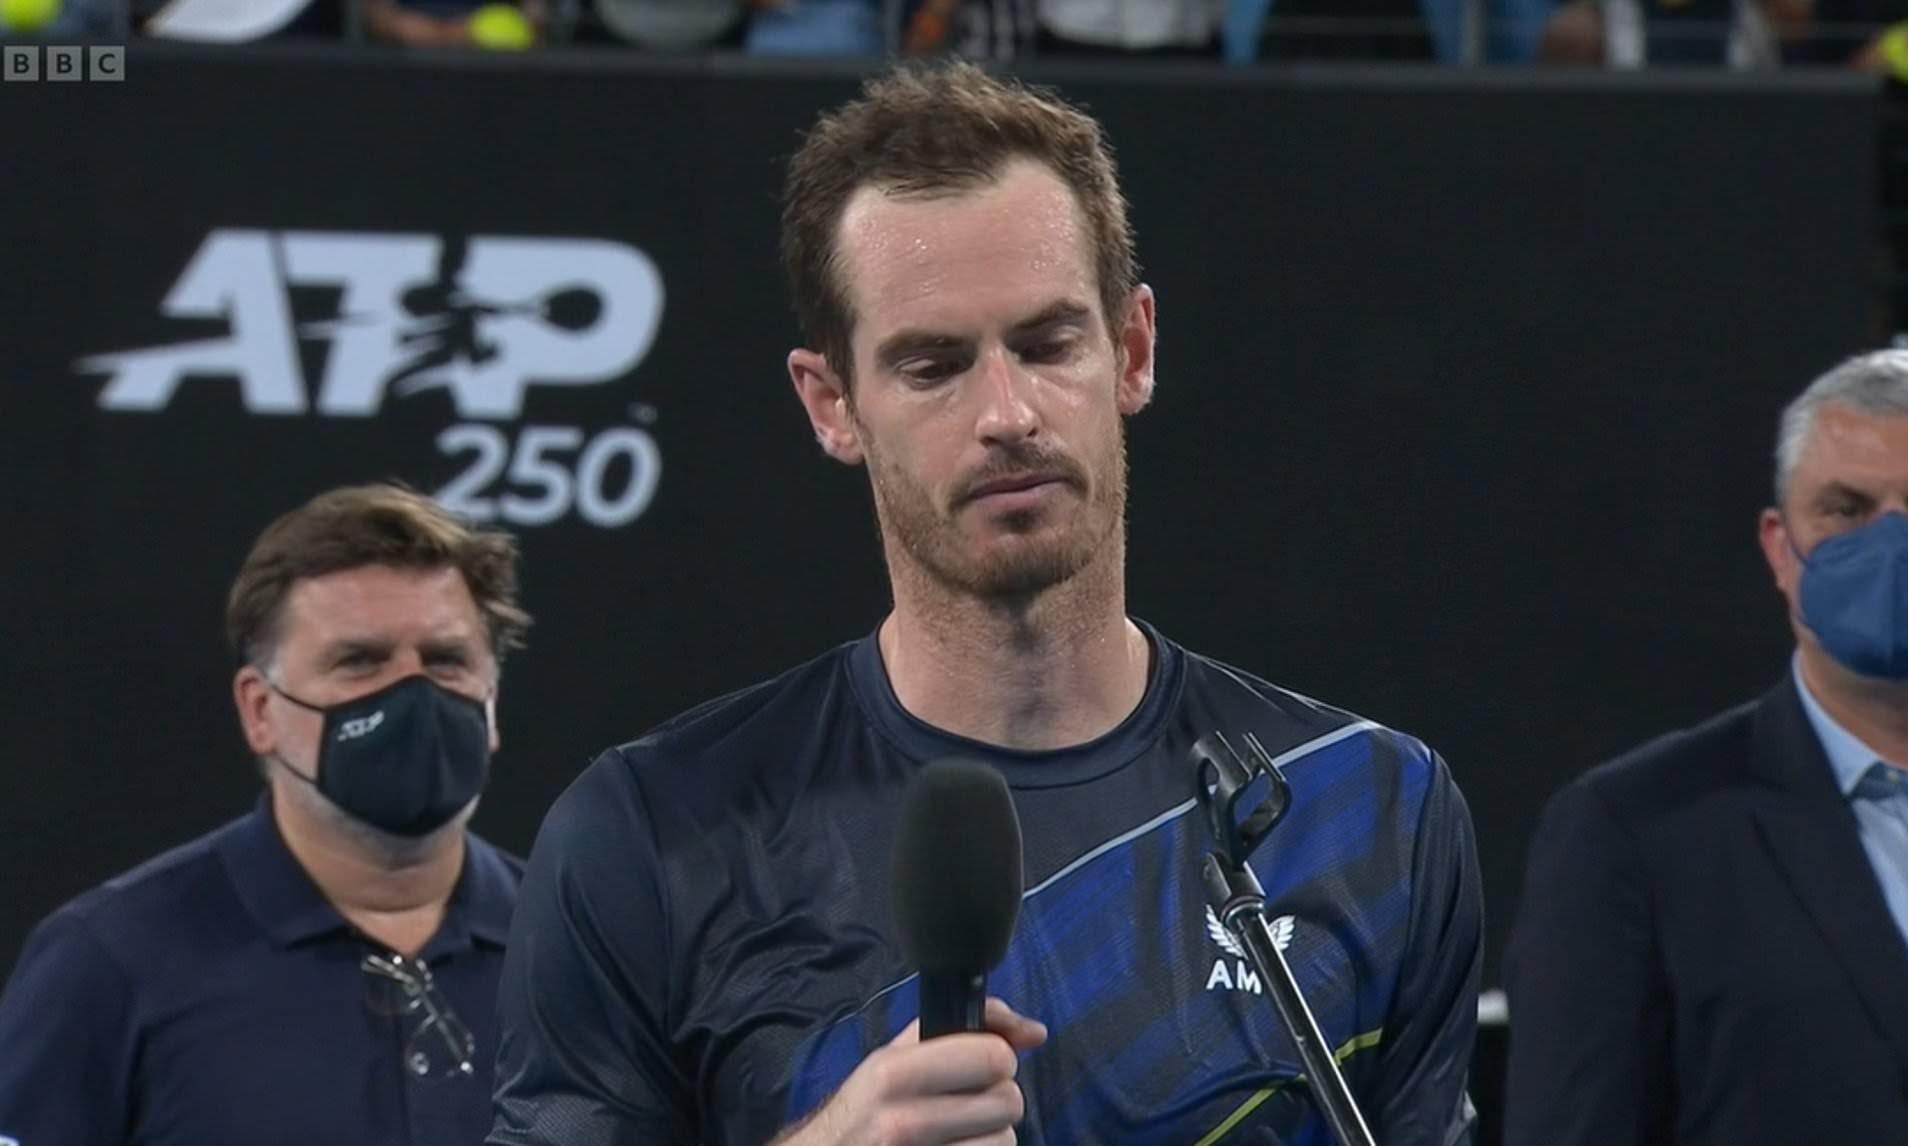 Andy Murray fights back the tears after defeat to Aslan Karatsev at Sydney Tennis Classic